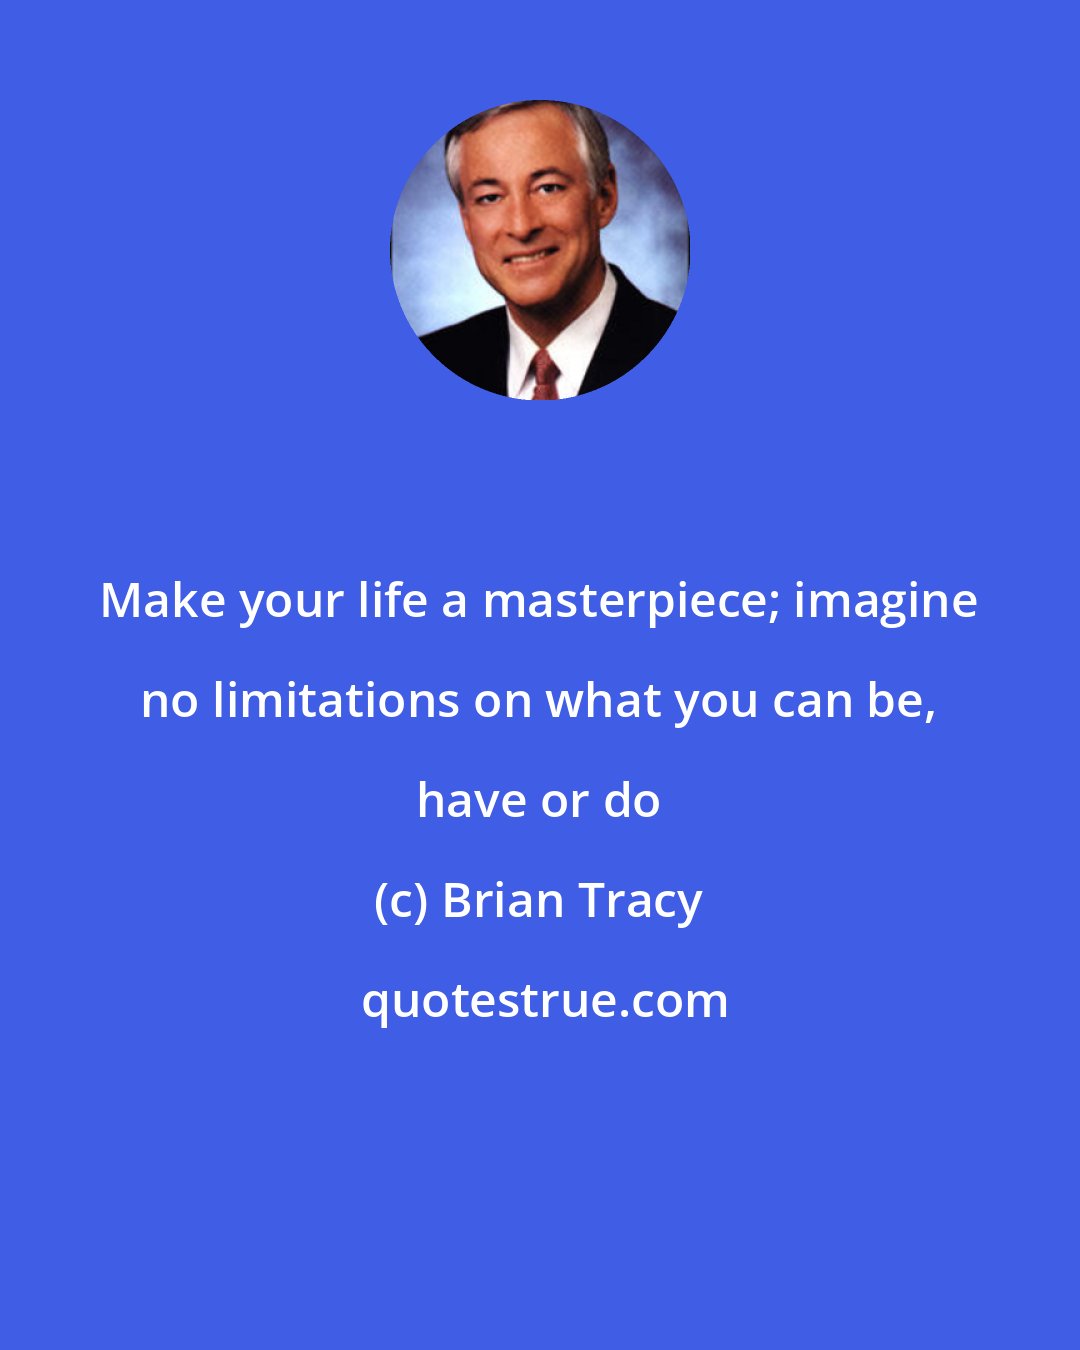 Brian Tracy: Make your life a masterpiece; imagine no limitations on what you can be, have or do